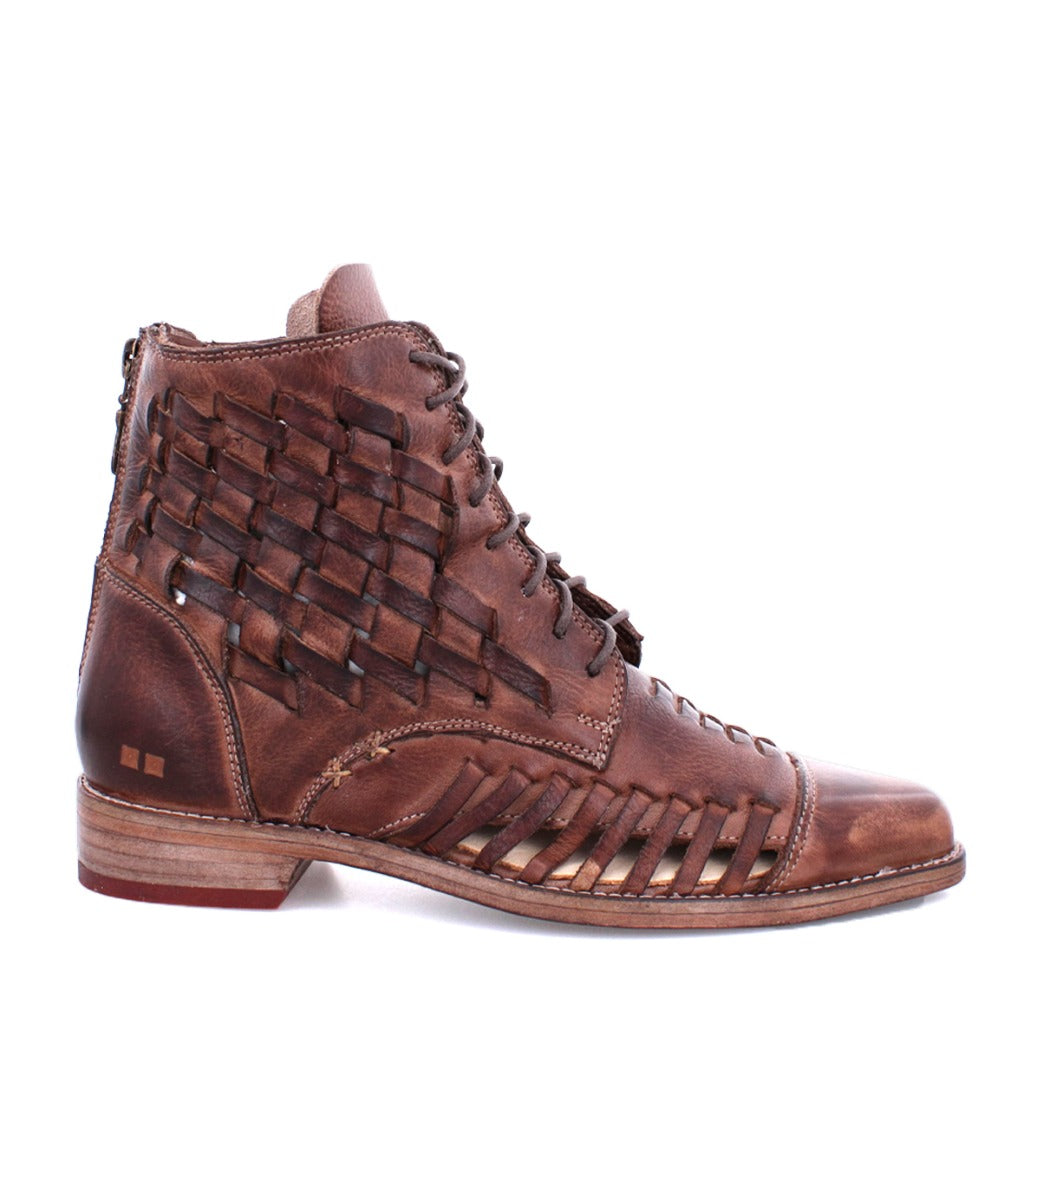 A brown leather Loretta boot with woven details by Bed Stu.